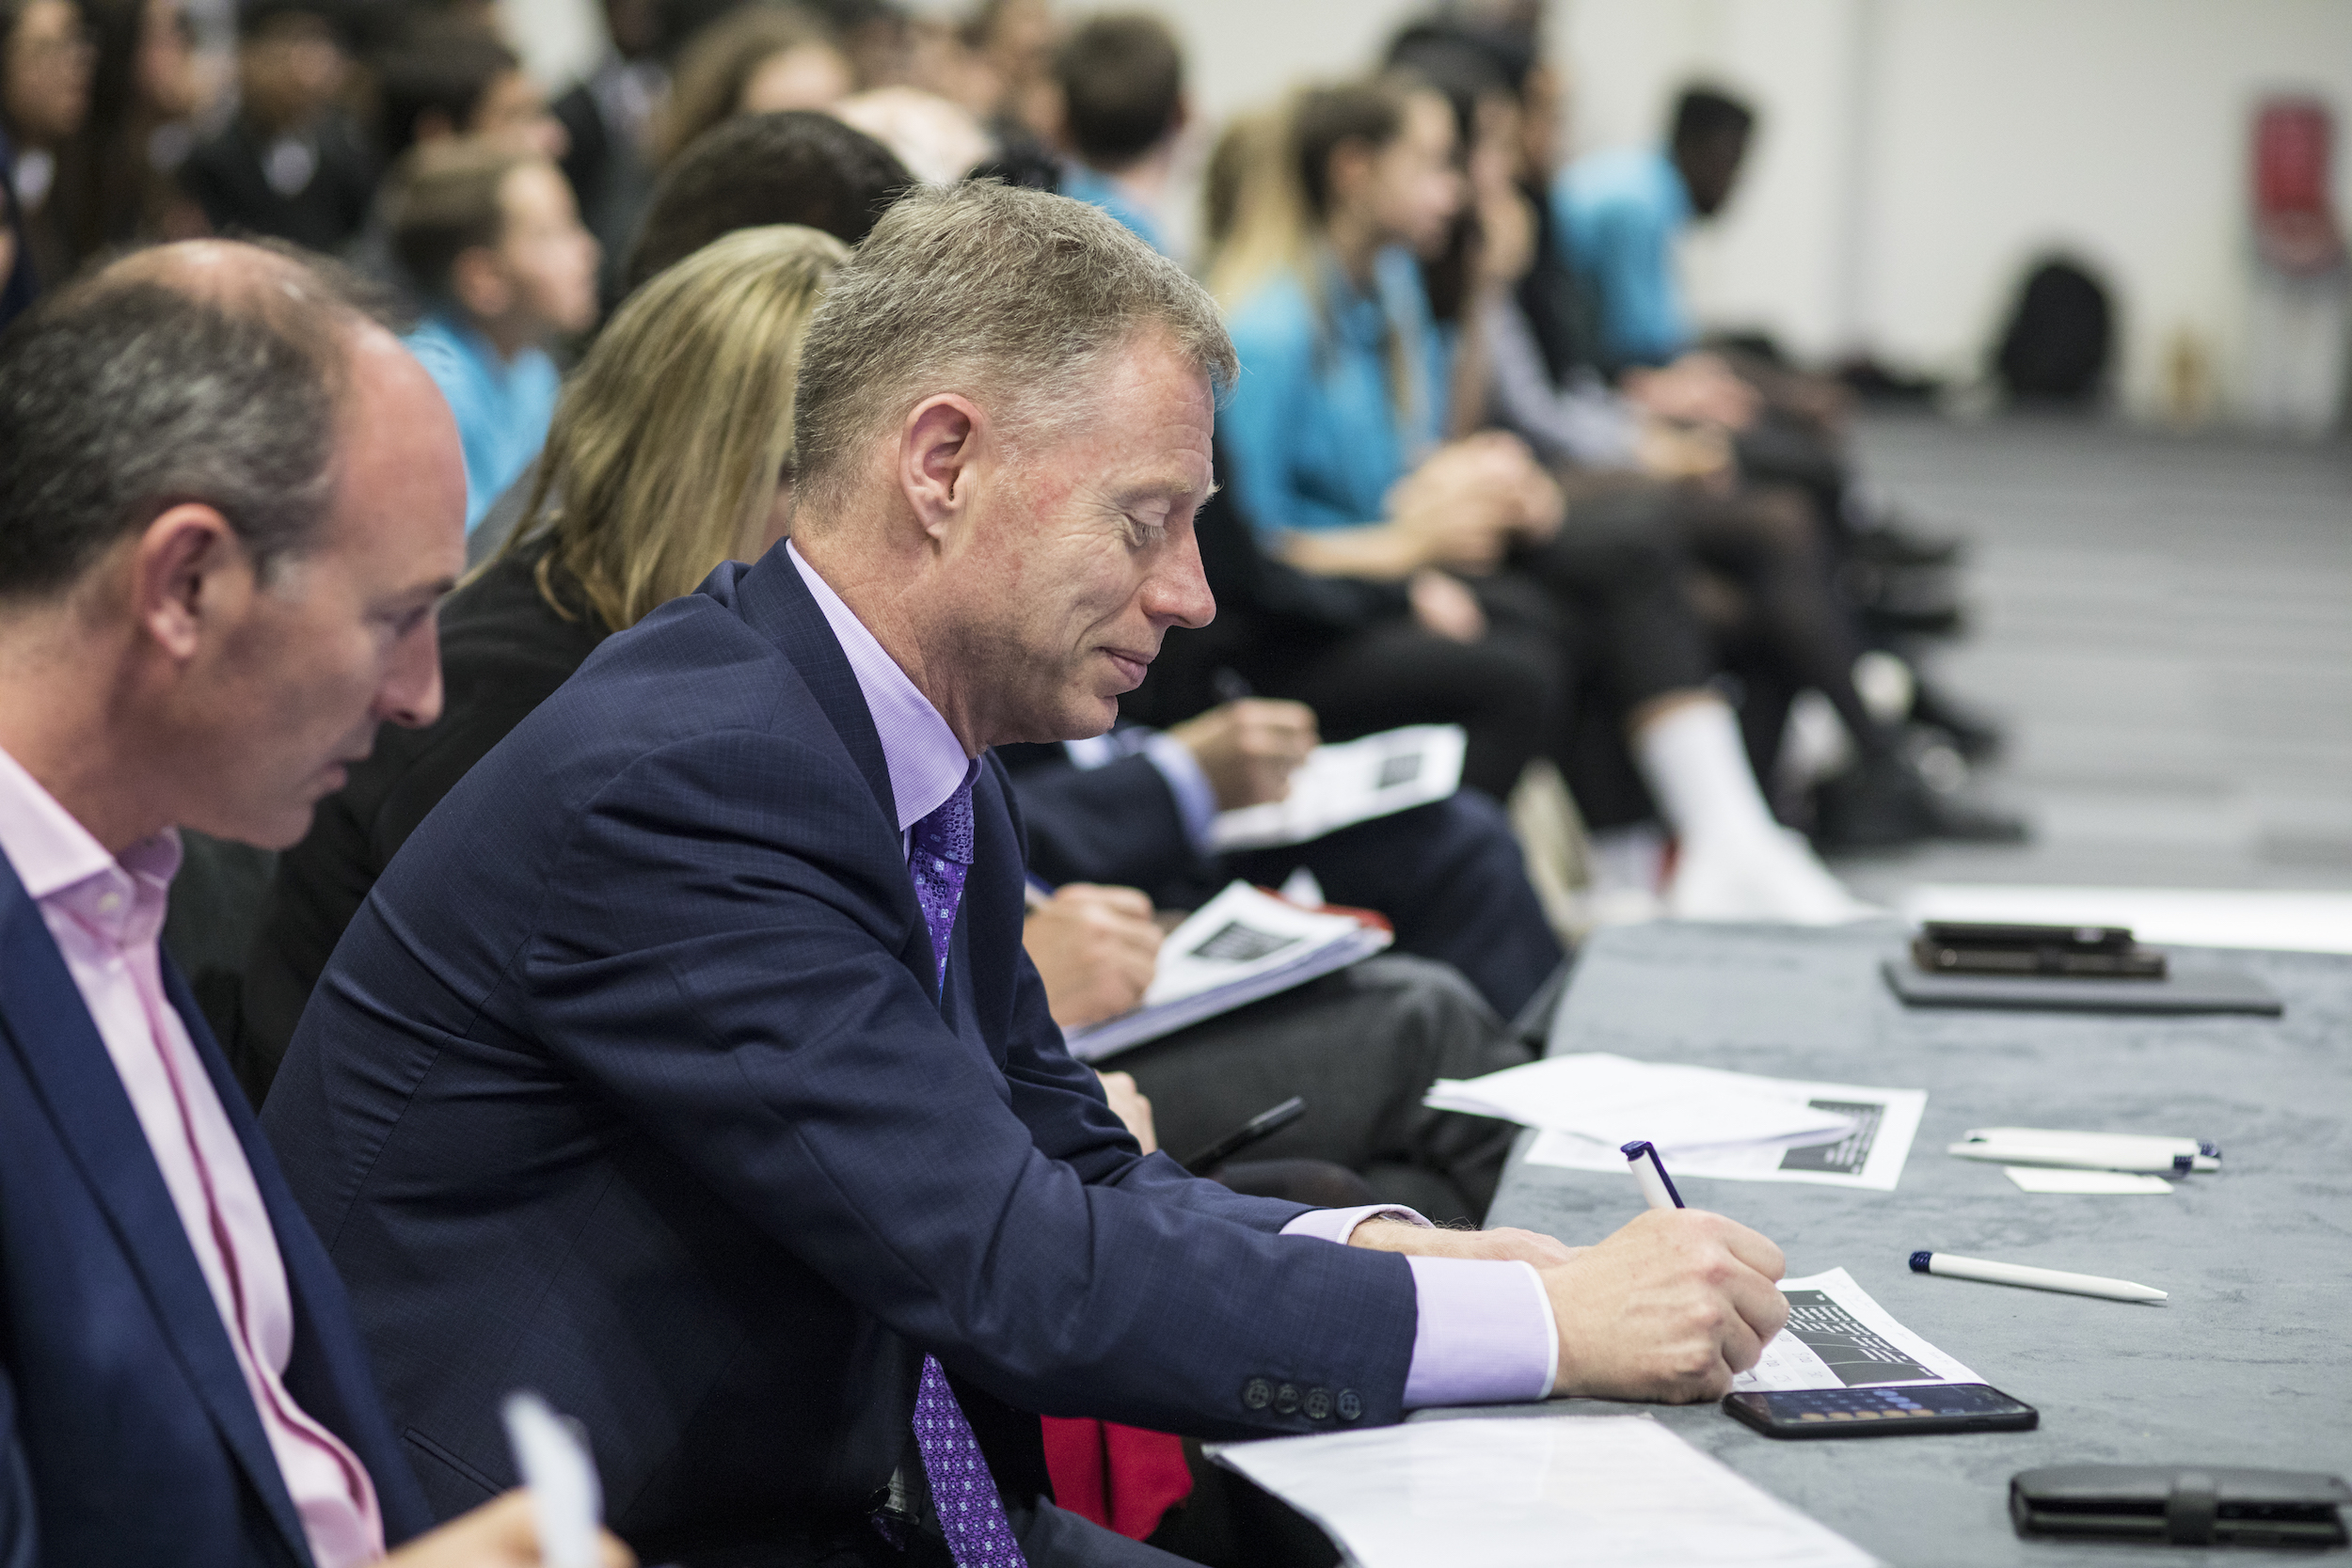 LCY CEO Robert Sinclair sitting on a judging panel, with a slight smile on his face making notes